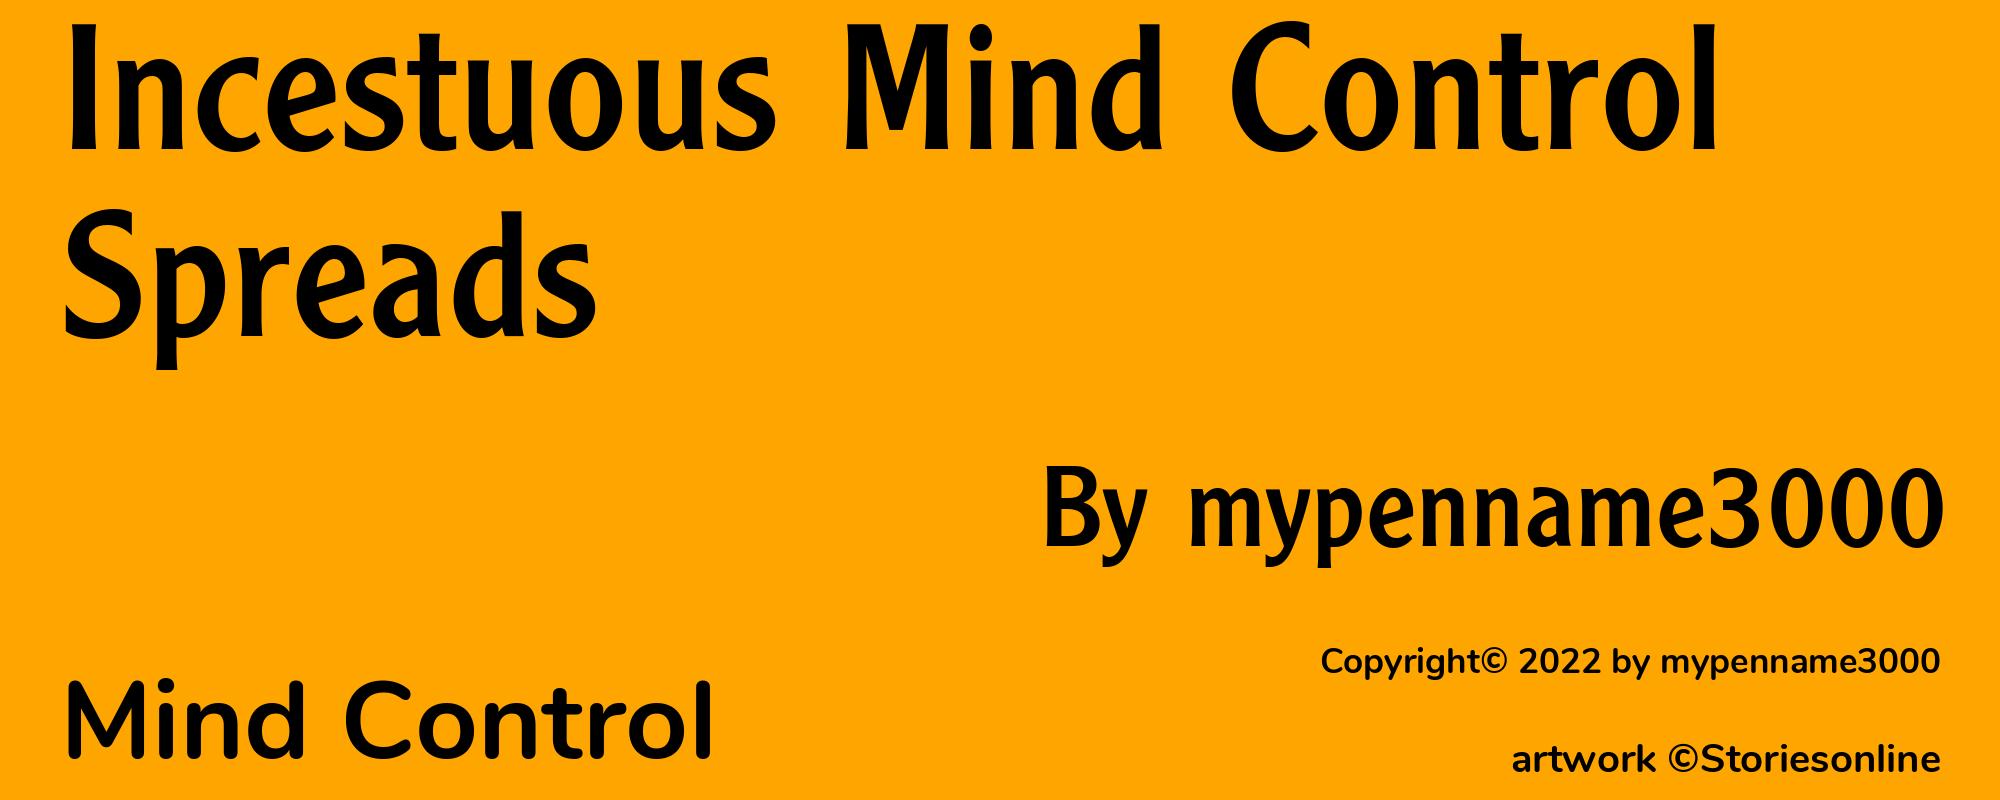 Incestuous Mind Control Spreads - Cover